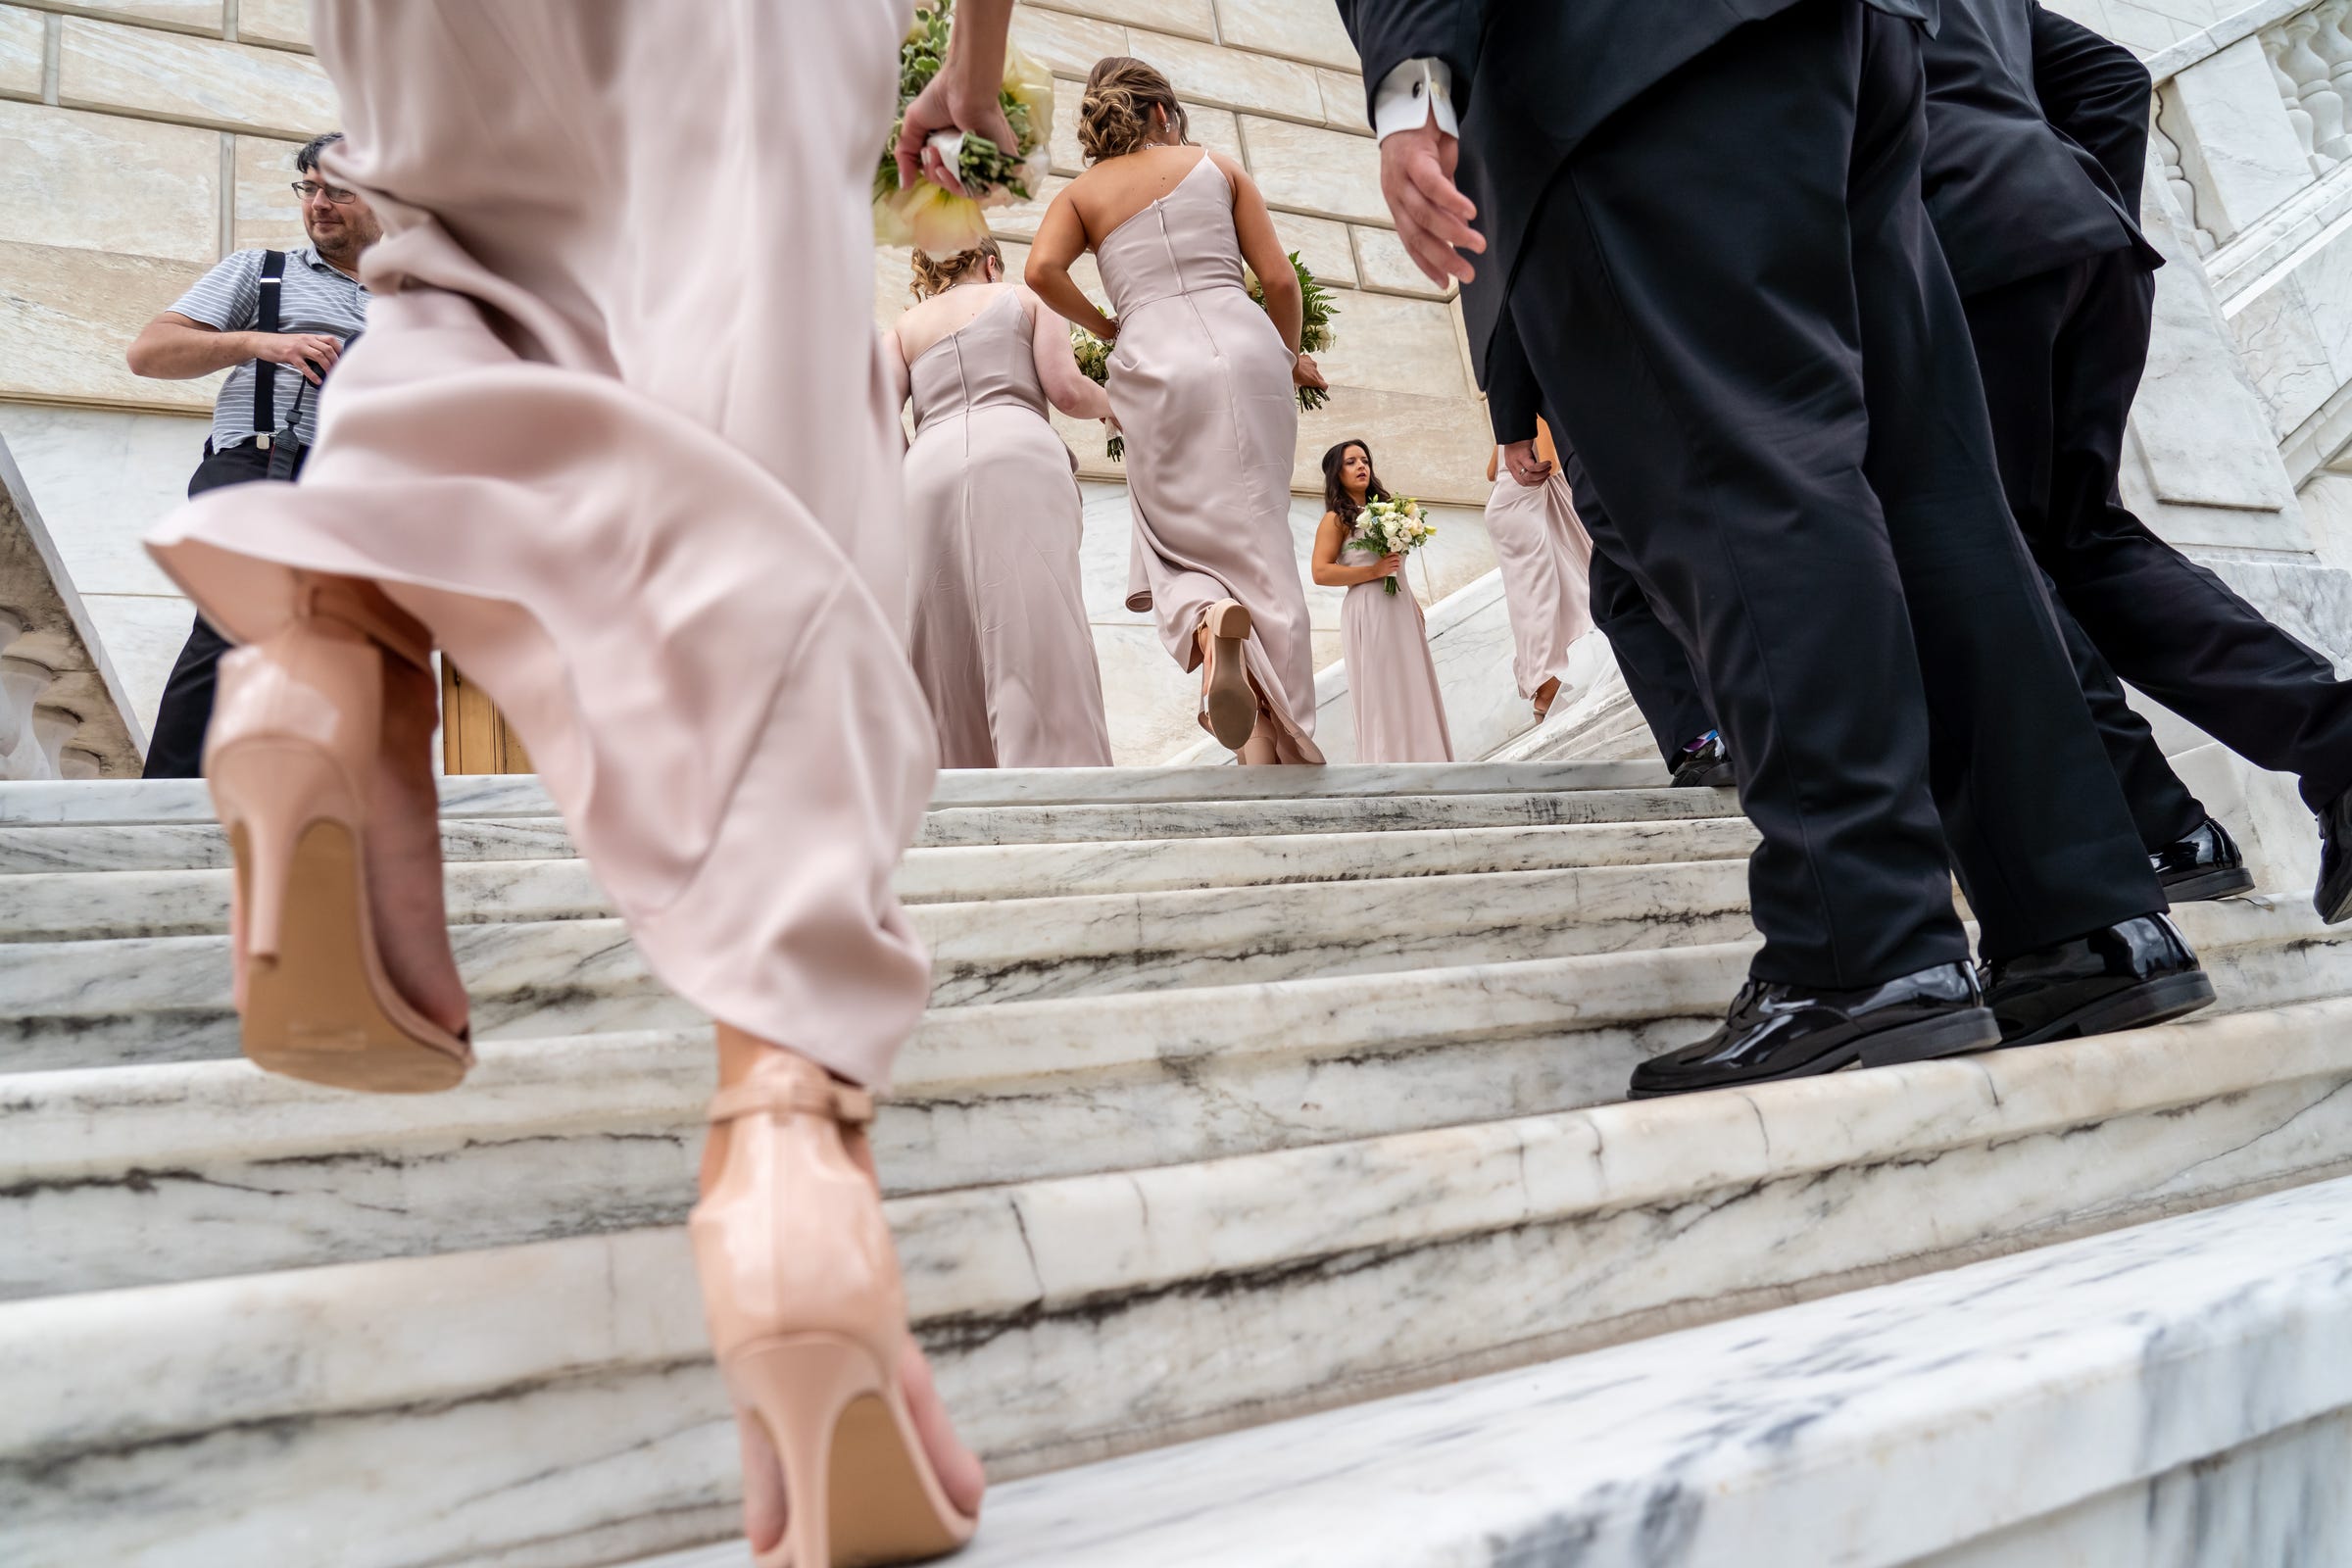 Photographer Arthur Safarov waits for a bridal party to get into position to take their photos on the staircase at the rear of the Detroit Institute of Arts on Saturday, June 19, 2021.